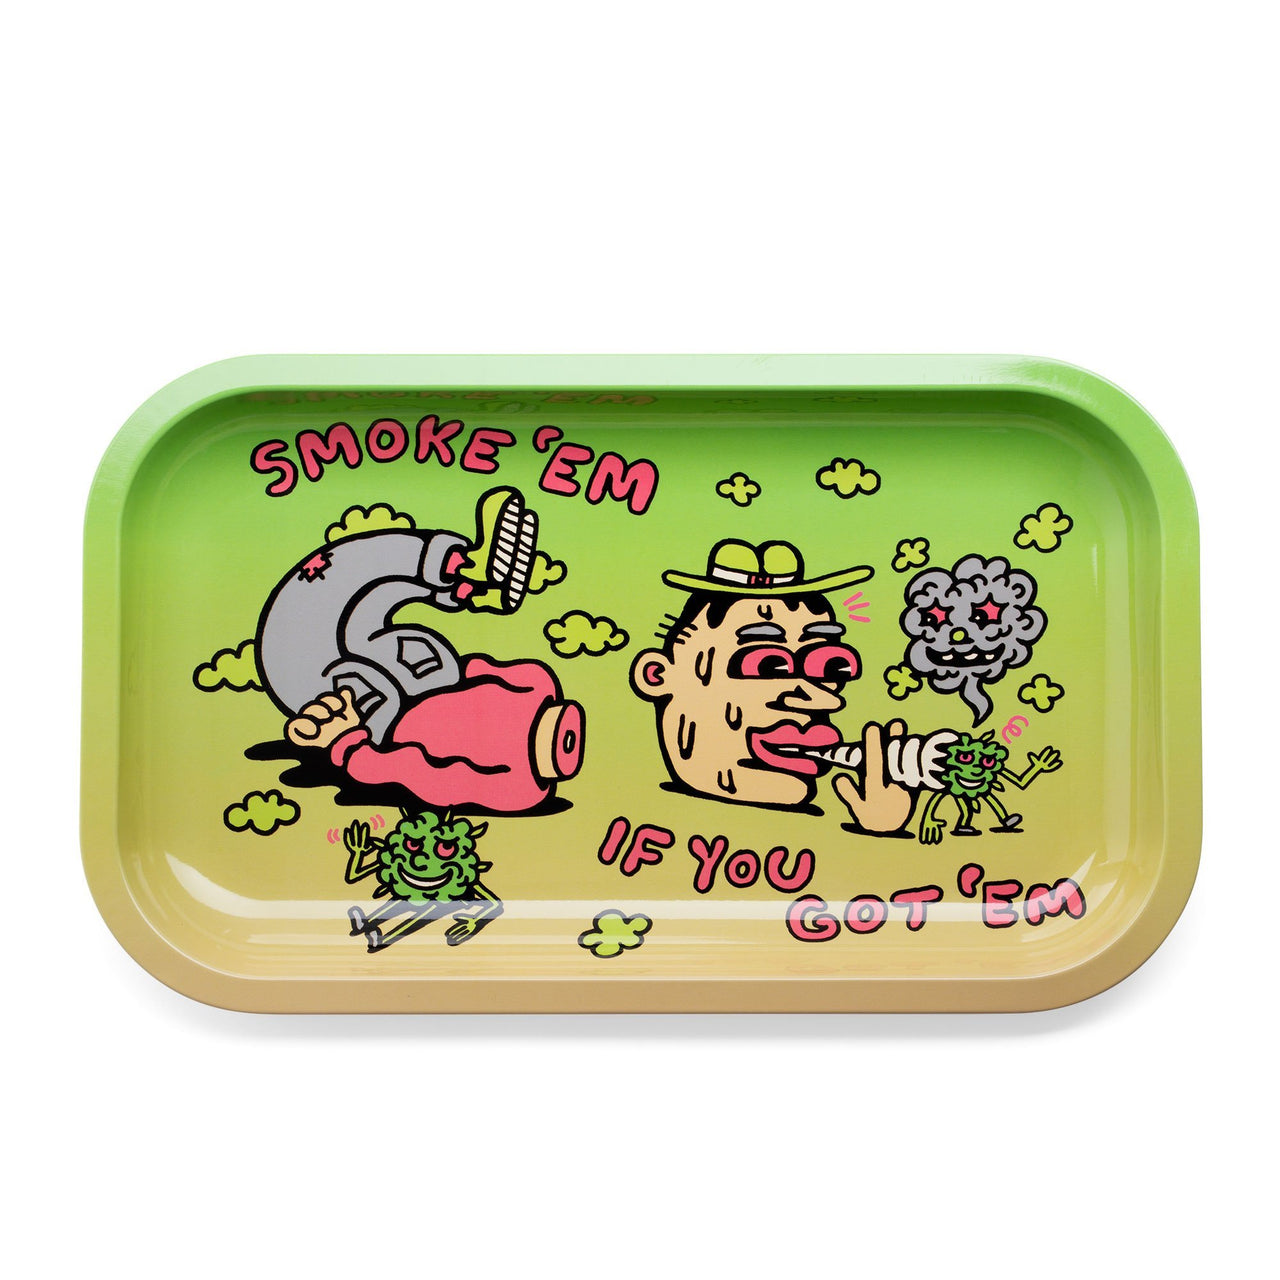 420 Science x Killer Acid Magnetic Lid Rolling Tray - Smoke Em | Rolling Trays | 420 Science